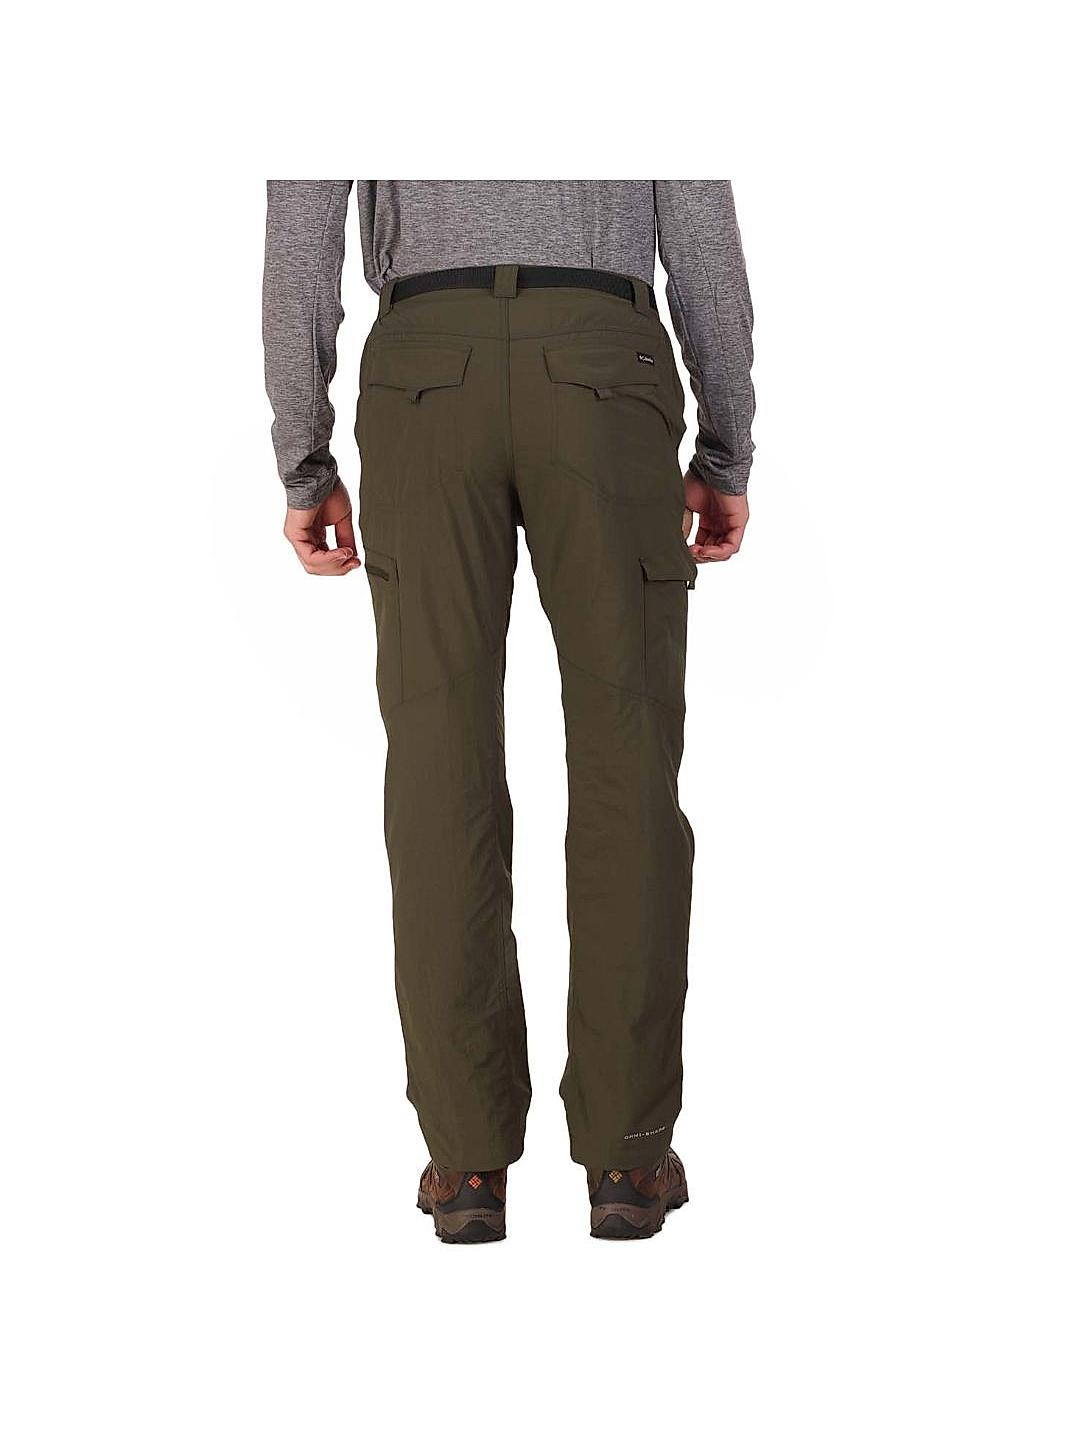 MAX Cargo Pant for Men : Amazon.in: Clothing & Accessories